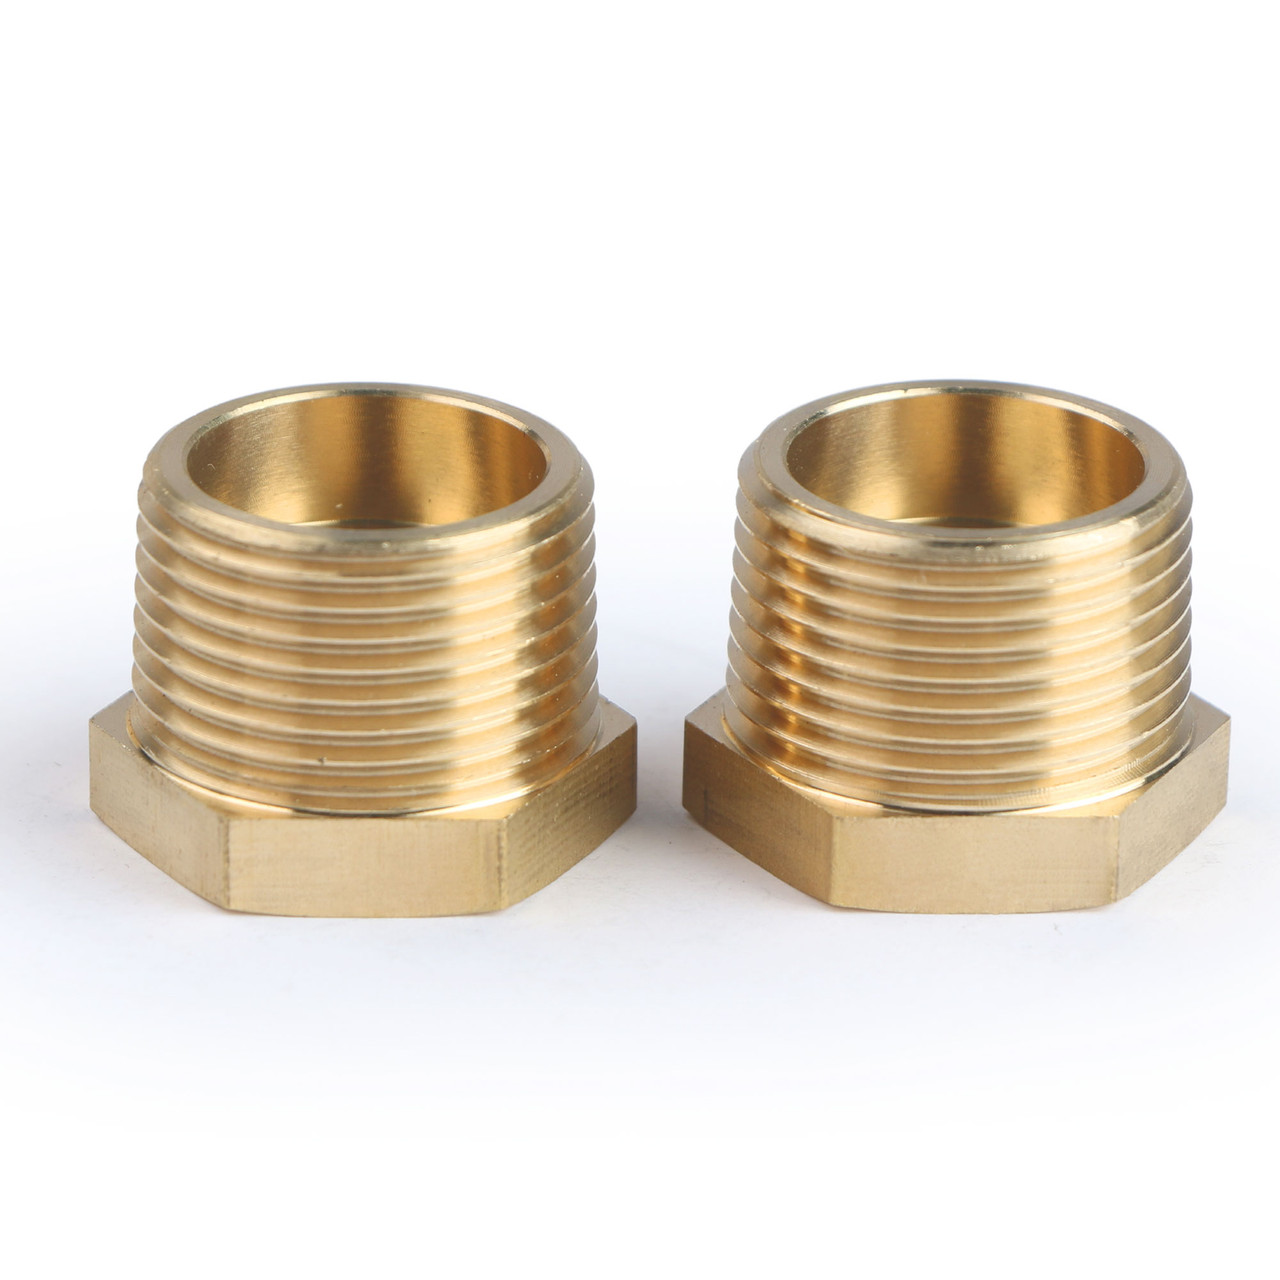 4pcs 1/2 Female to 1/2 Male Pipe Nipple Extension Connector Fitting,Brass  Pipe Fitting Reducer Adapter,Hex Bushing Adapter, Solid Brass Length